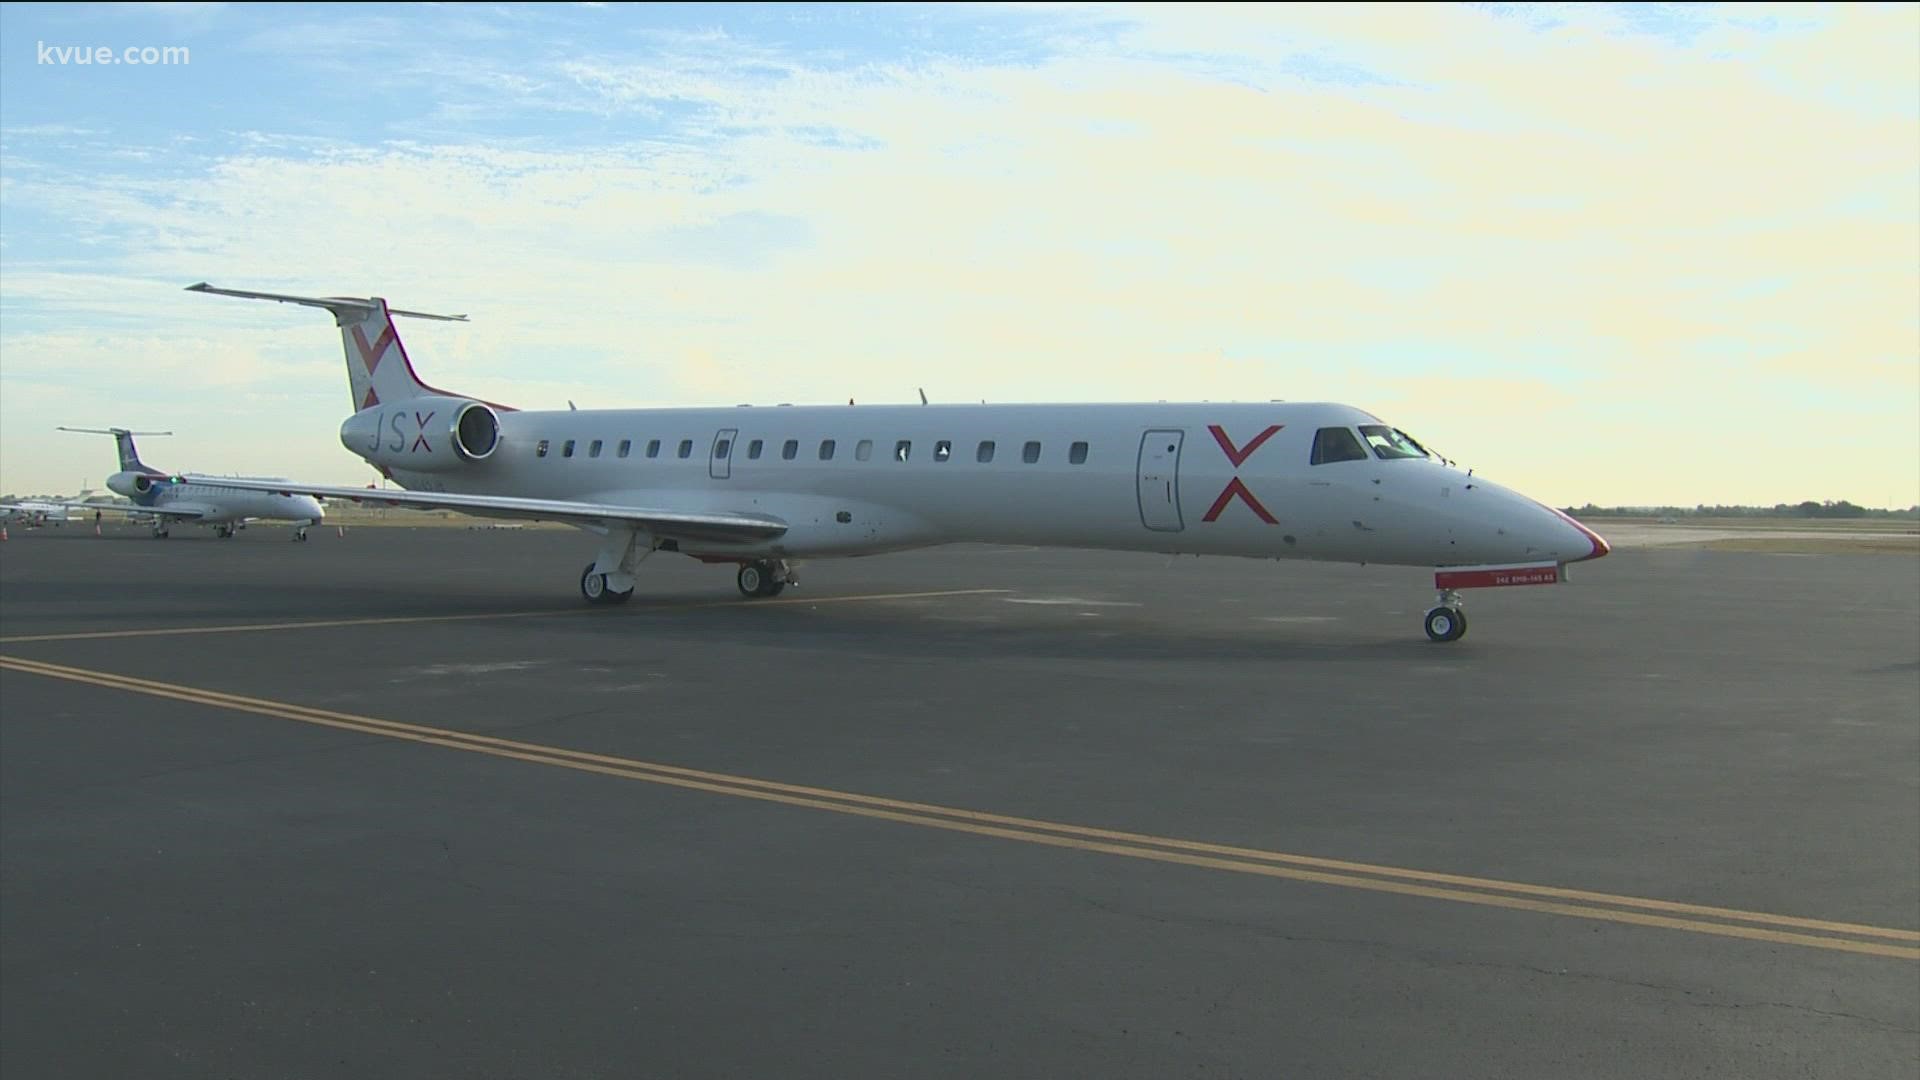 JSX is launching flights from Austin to Dallas Love Field twice a day. KVUE got a behind-the-scenes look at the first flight on Monday.